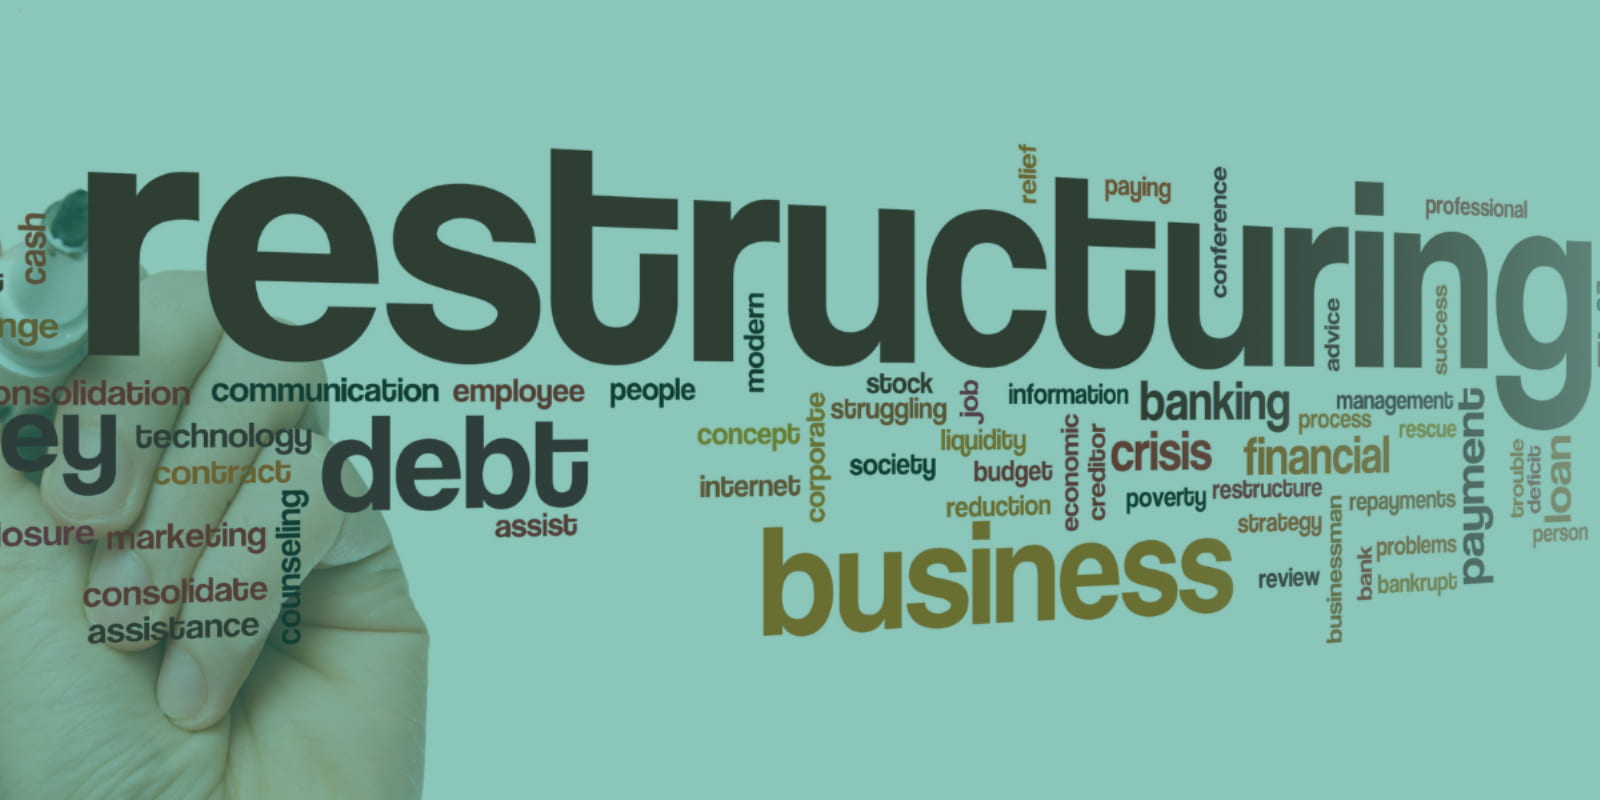 What Is The Difference Between Corporate Restructuring & Business Restructuring?